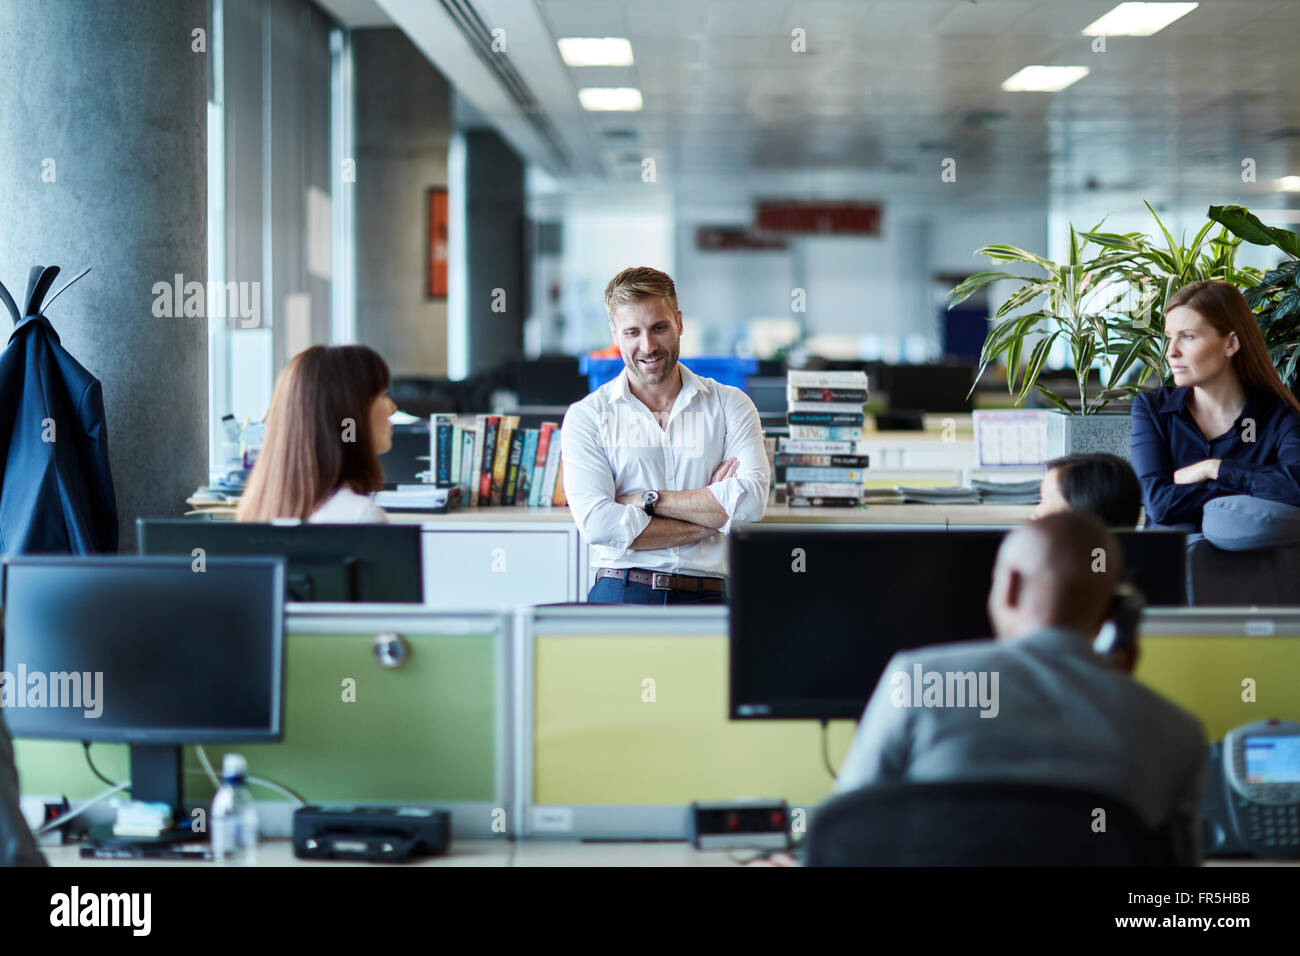 Business people talking in office cubicle Stock Photo